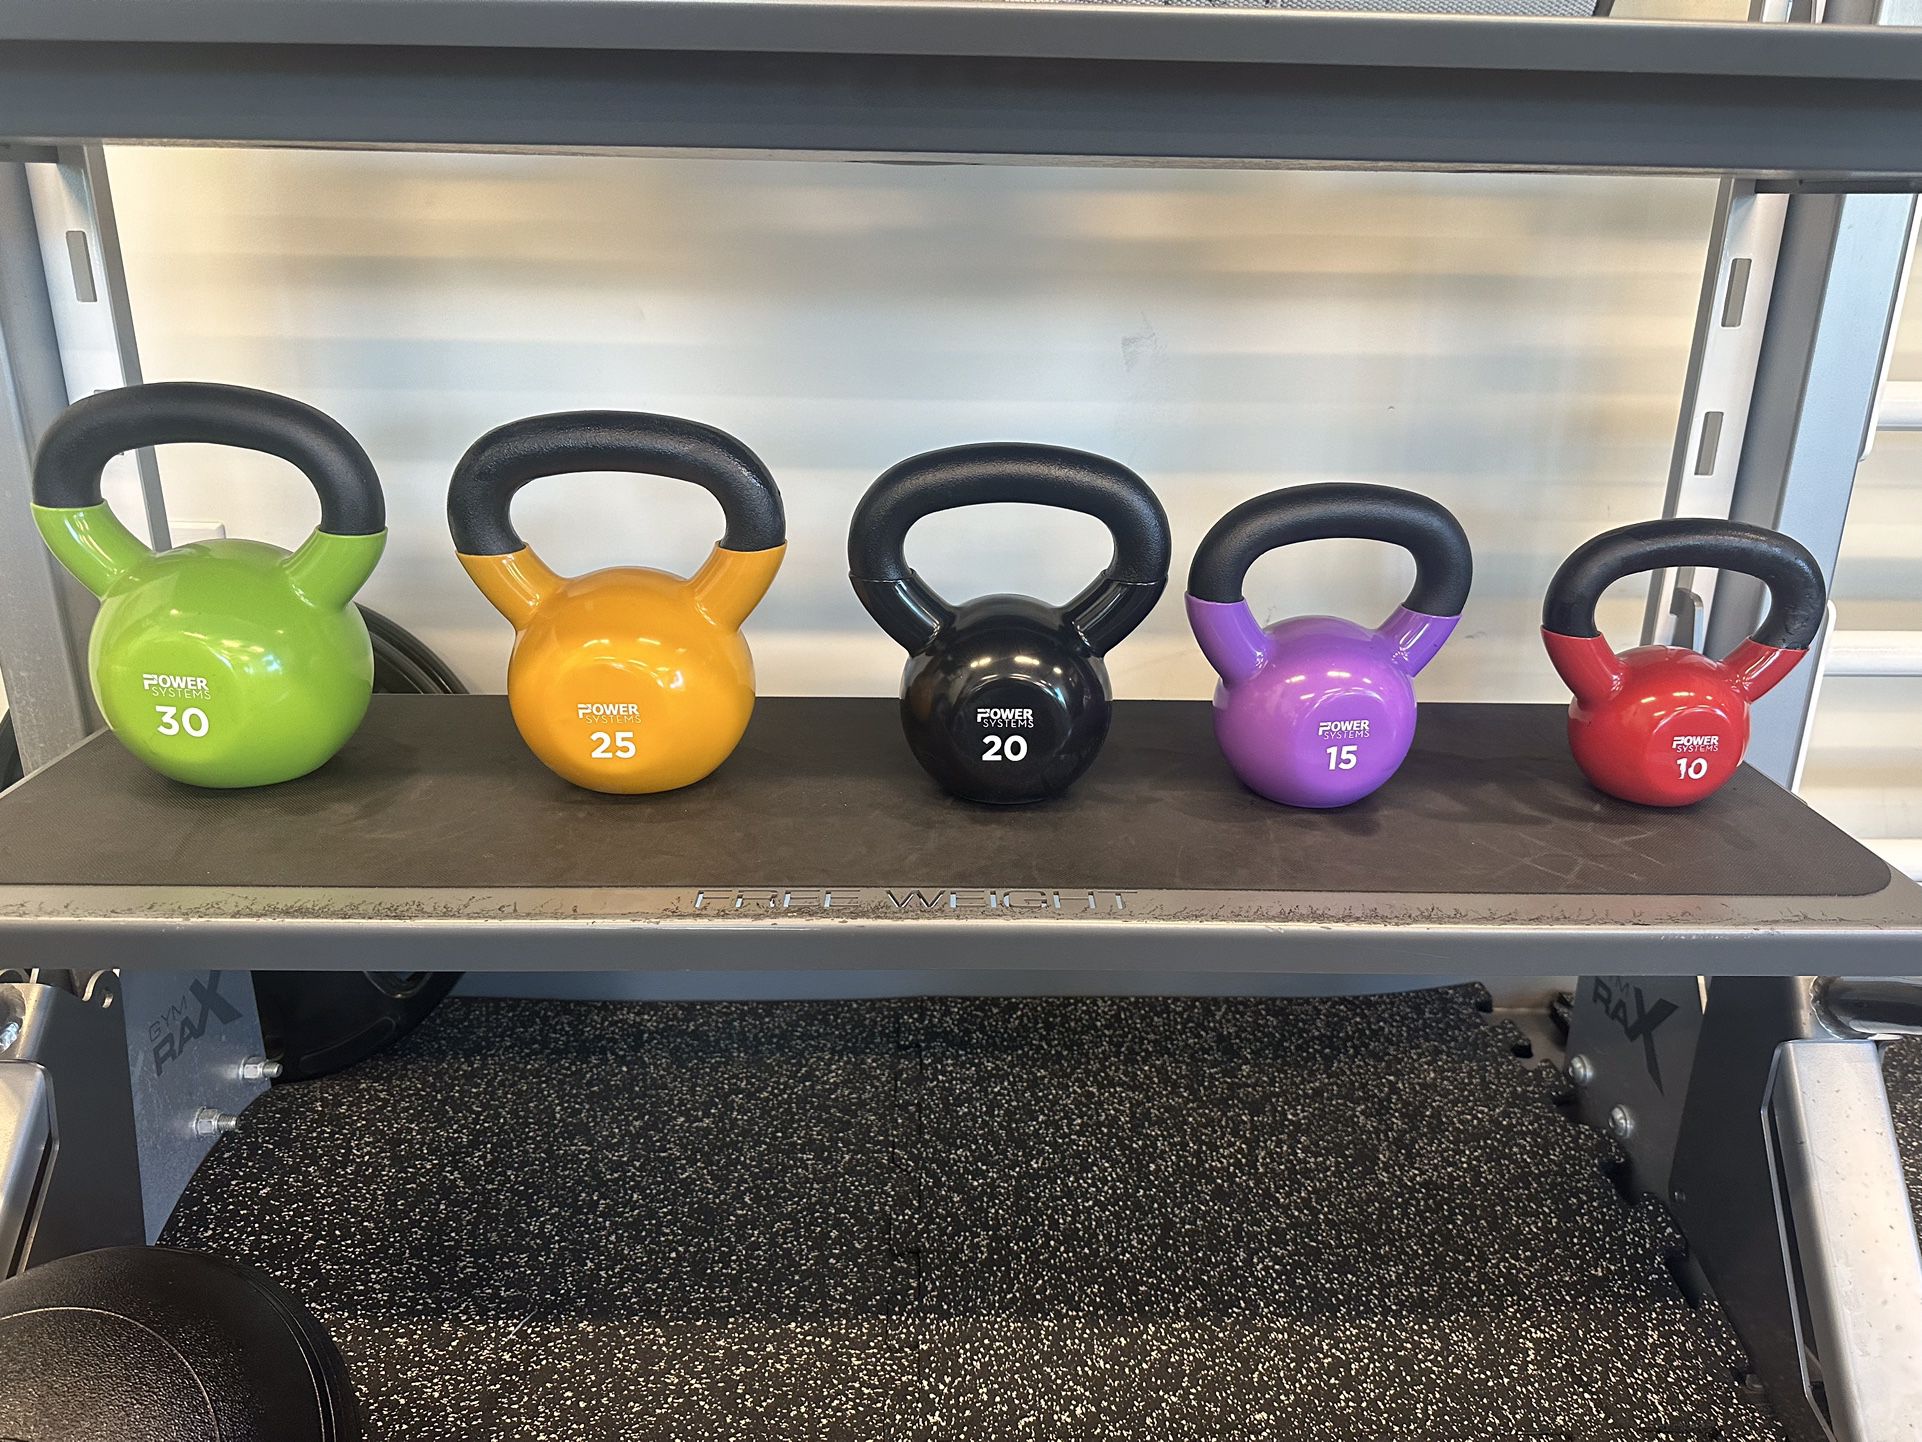 New Inventory Of : Weightlifting, Exercise, And Crossfit Training.